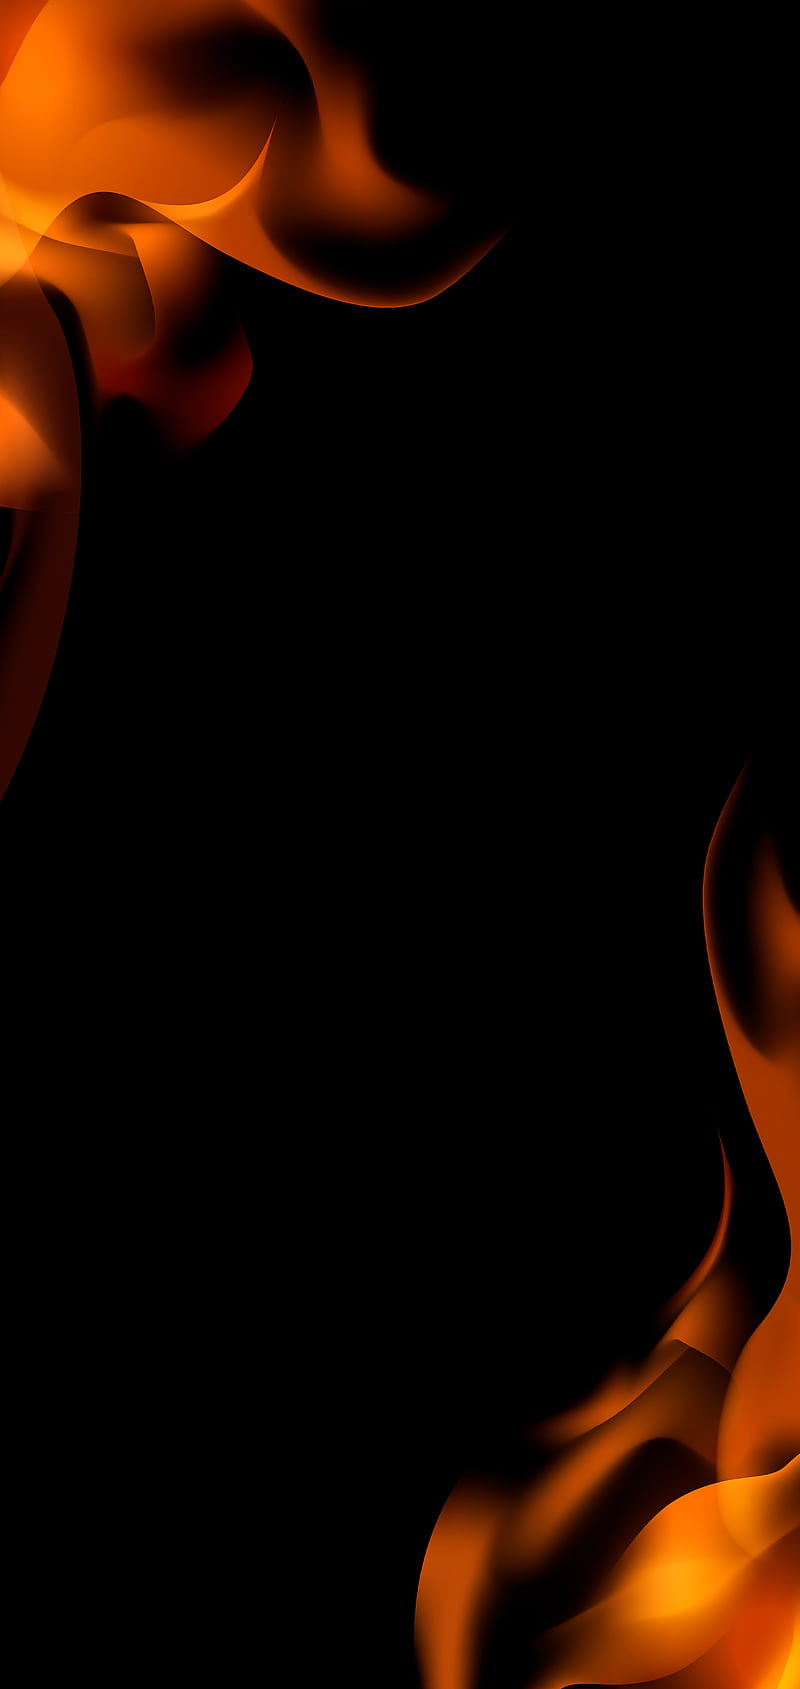 556296 1920x1080 abstract vector colorful fire water black background  wallpaper JPG 180 kB  Rare Gallery HD Wallpapers